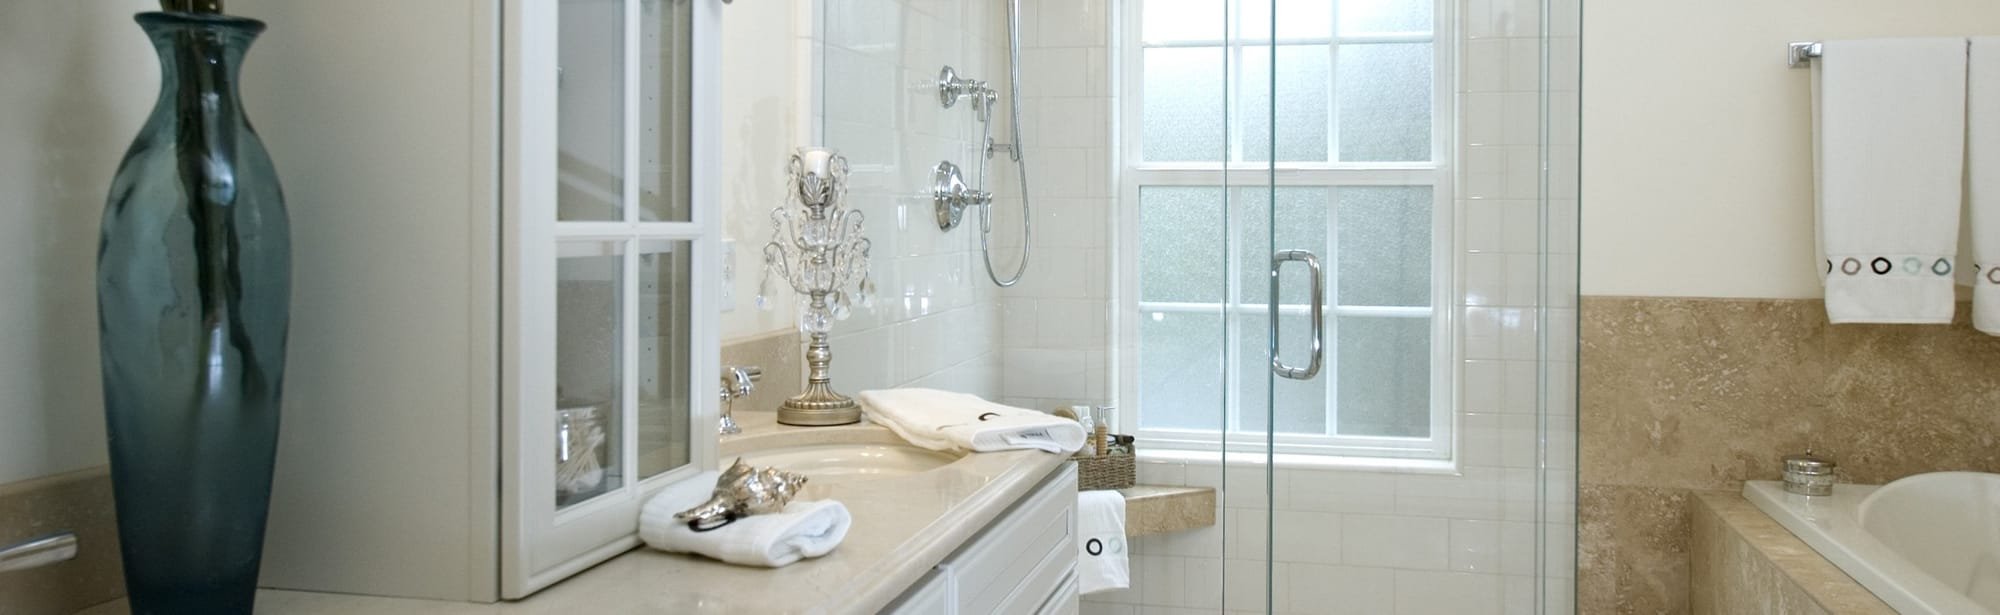 Installation Of Glass Shower Doors Miami Can Make The Room Look More Spacious!